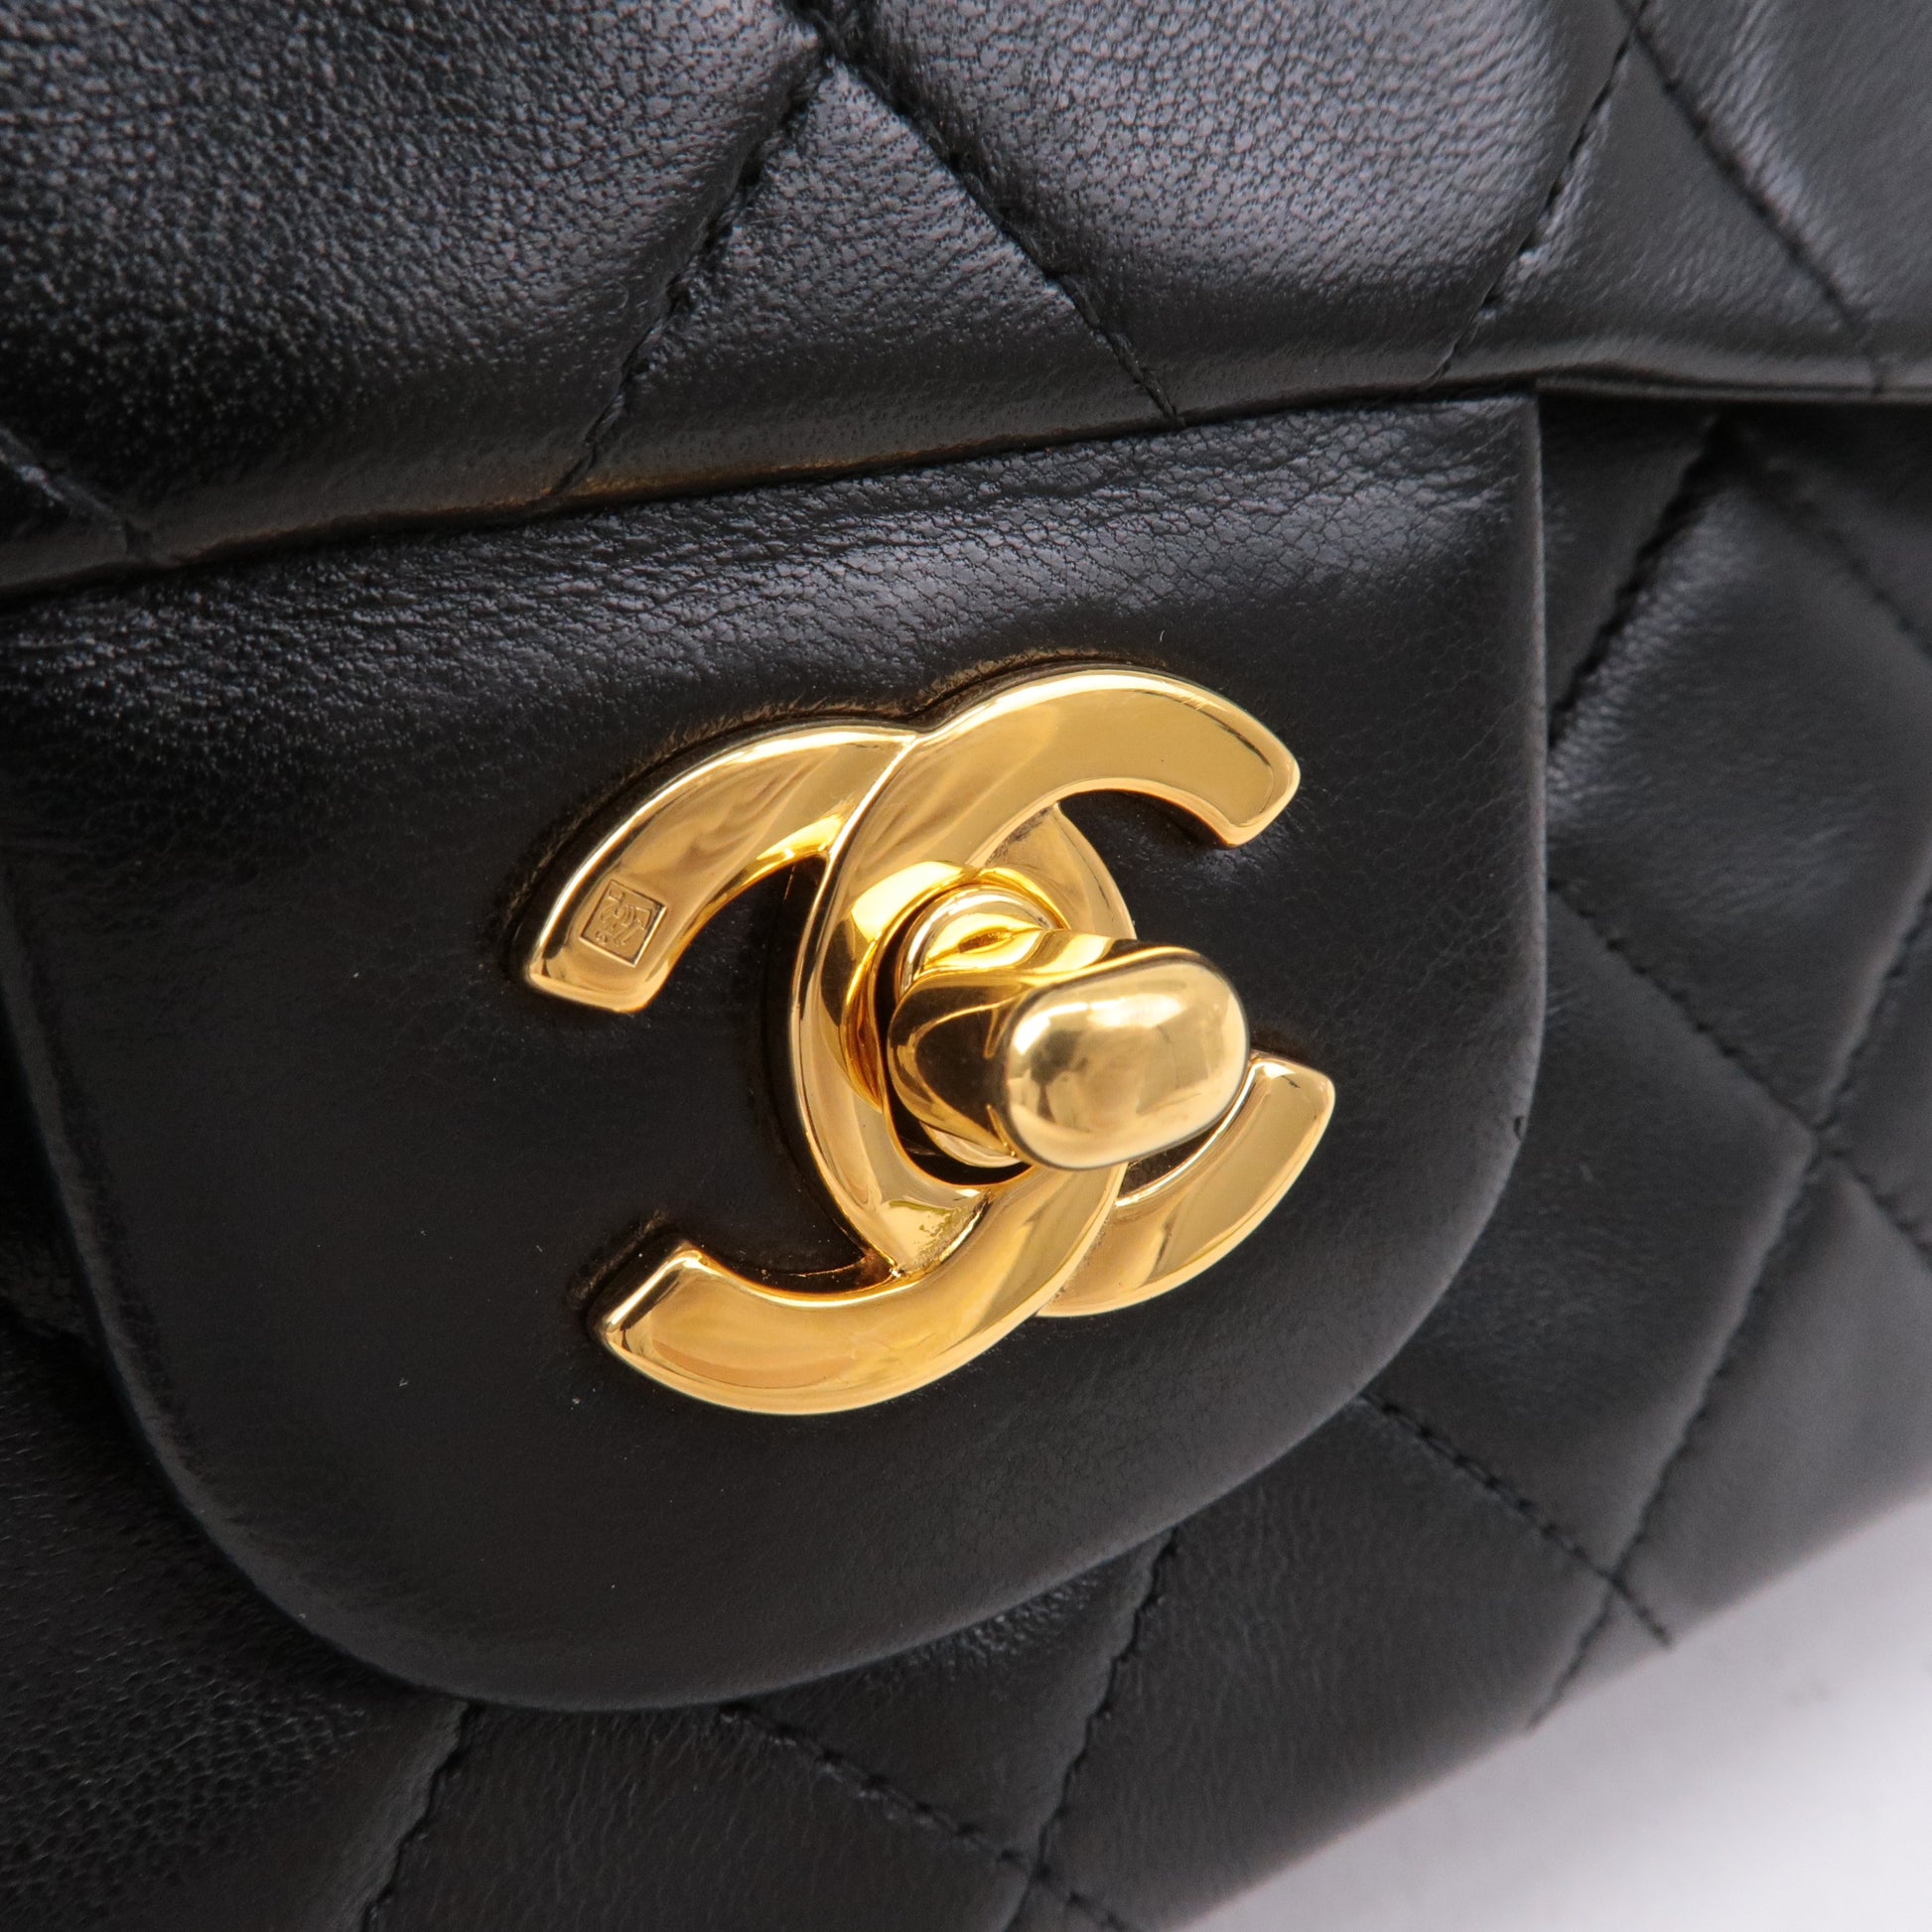 Chanel Black Lambskin Matelasse Tote With Gold Hardware - A World